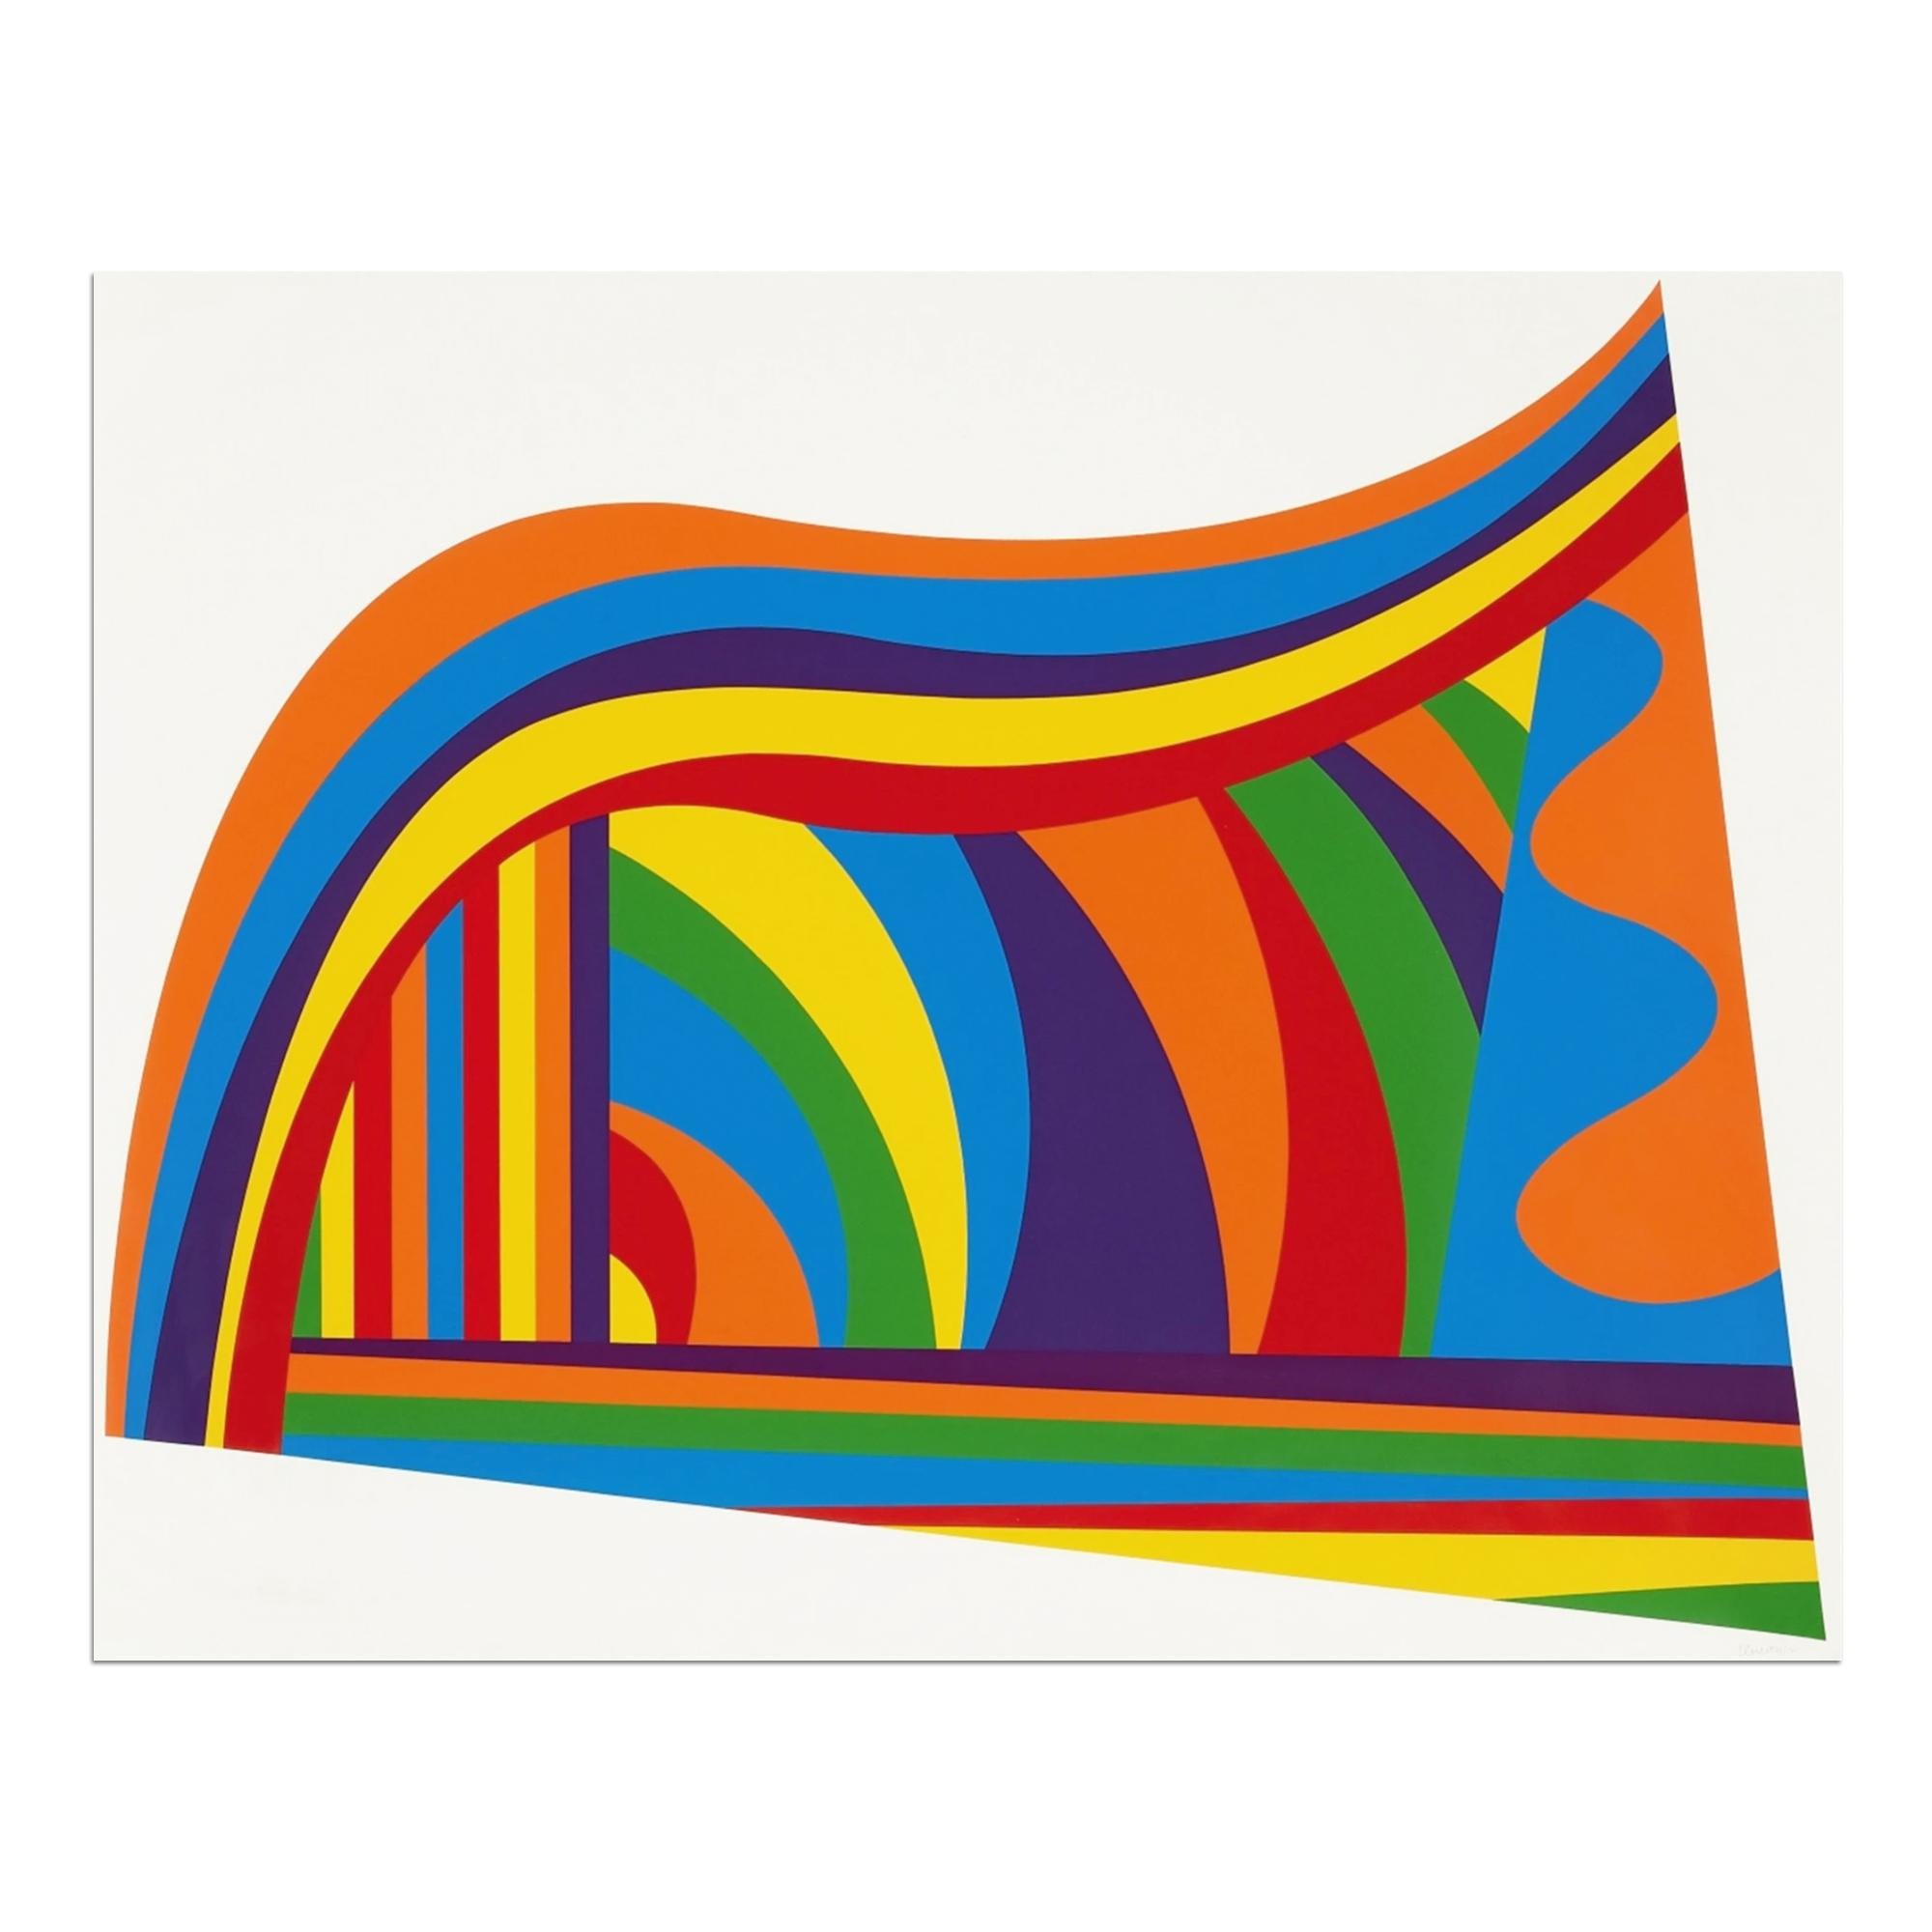 Sol LeWitt, Arc and Bands in Colors 2 - Abstract Art, Minimalism, Conceptual Art